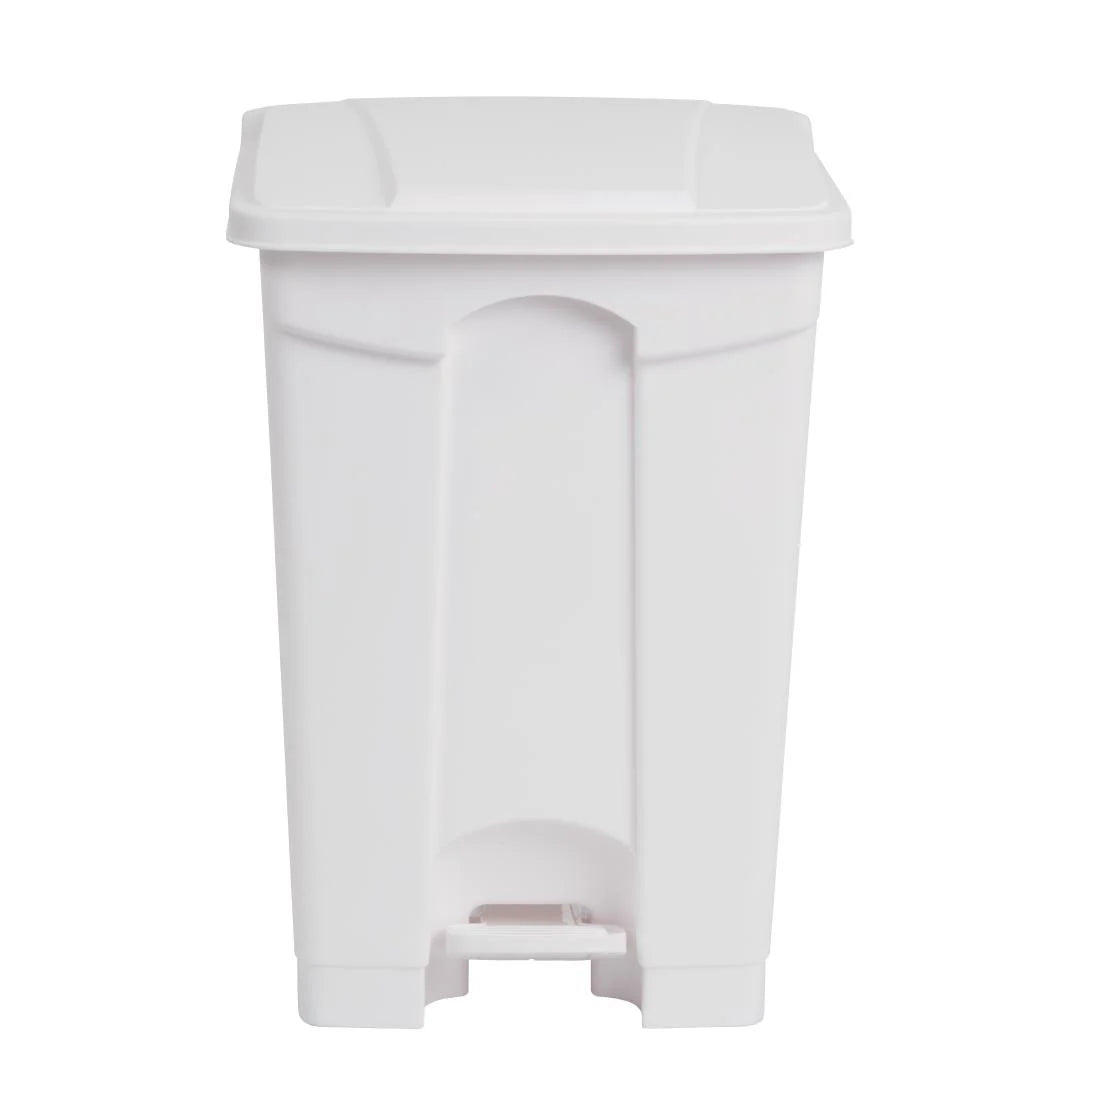 Jantex Kitchen Pedal Bin White 45Ltr .Product Ref:00695.Model: DC709. 🚚 1-3 Days Delivery